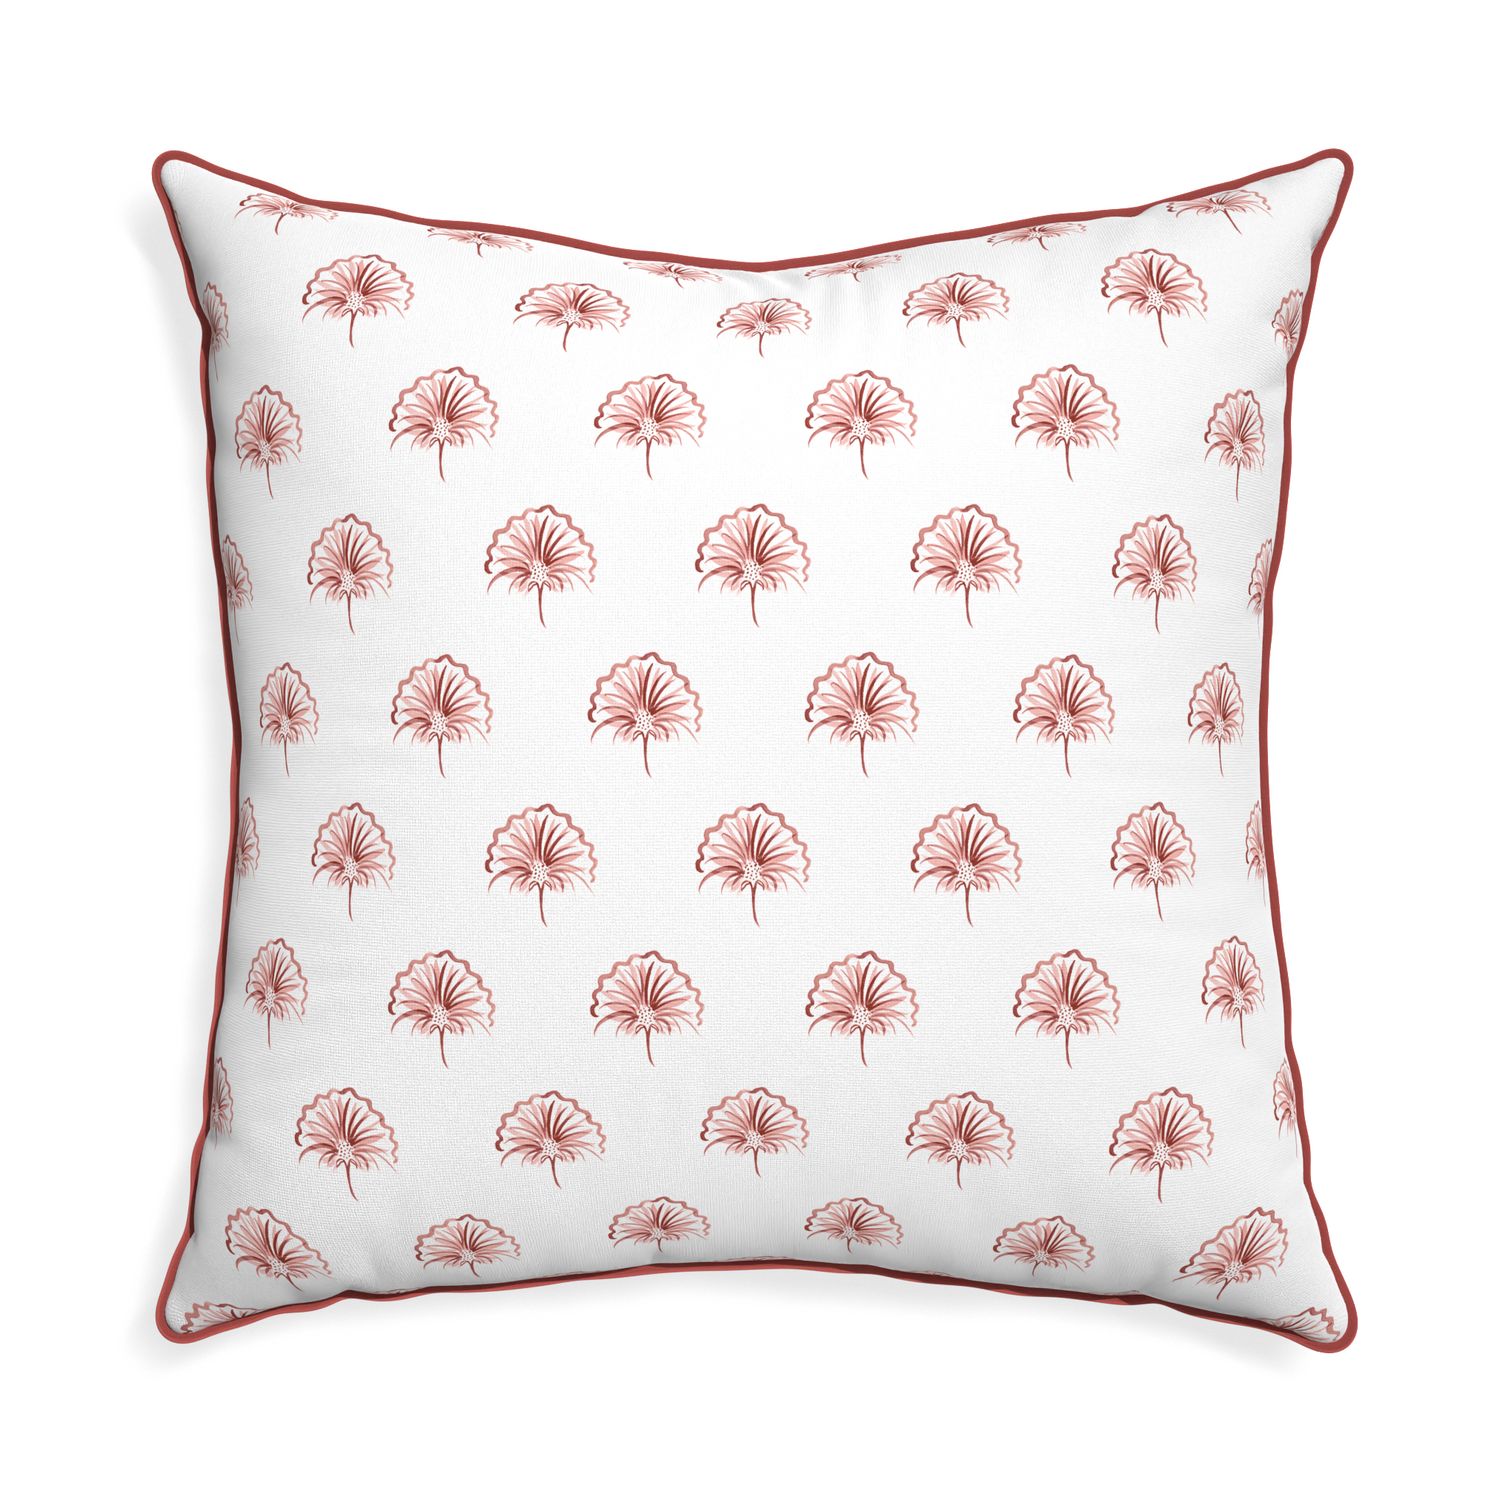 Euro-sham penelope rose custom floral pinkpillow with c piping on white background